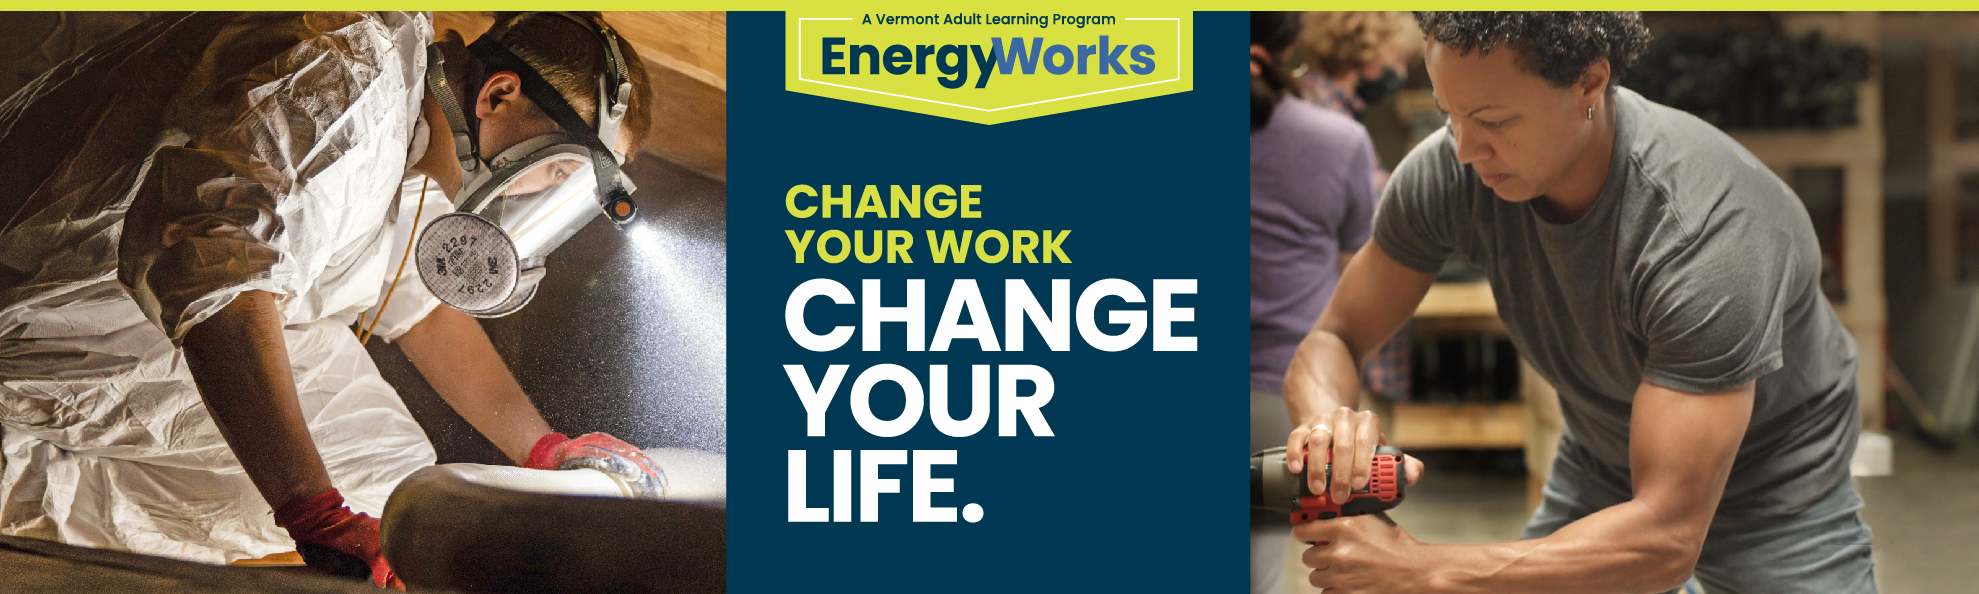 A Vermont Adult Learning Program - EnergyWorks - Change Your Work - Change Your Life - Individual providing weatherization improvements or heat pump installation